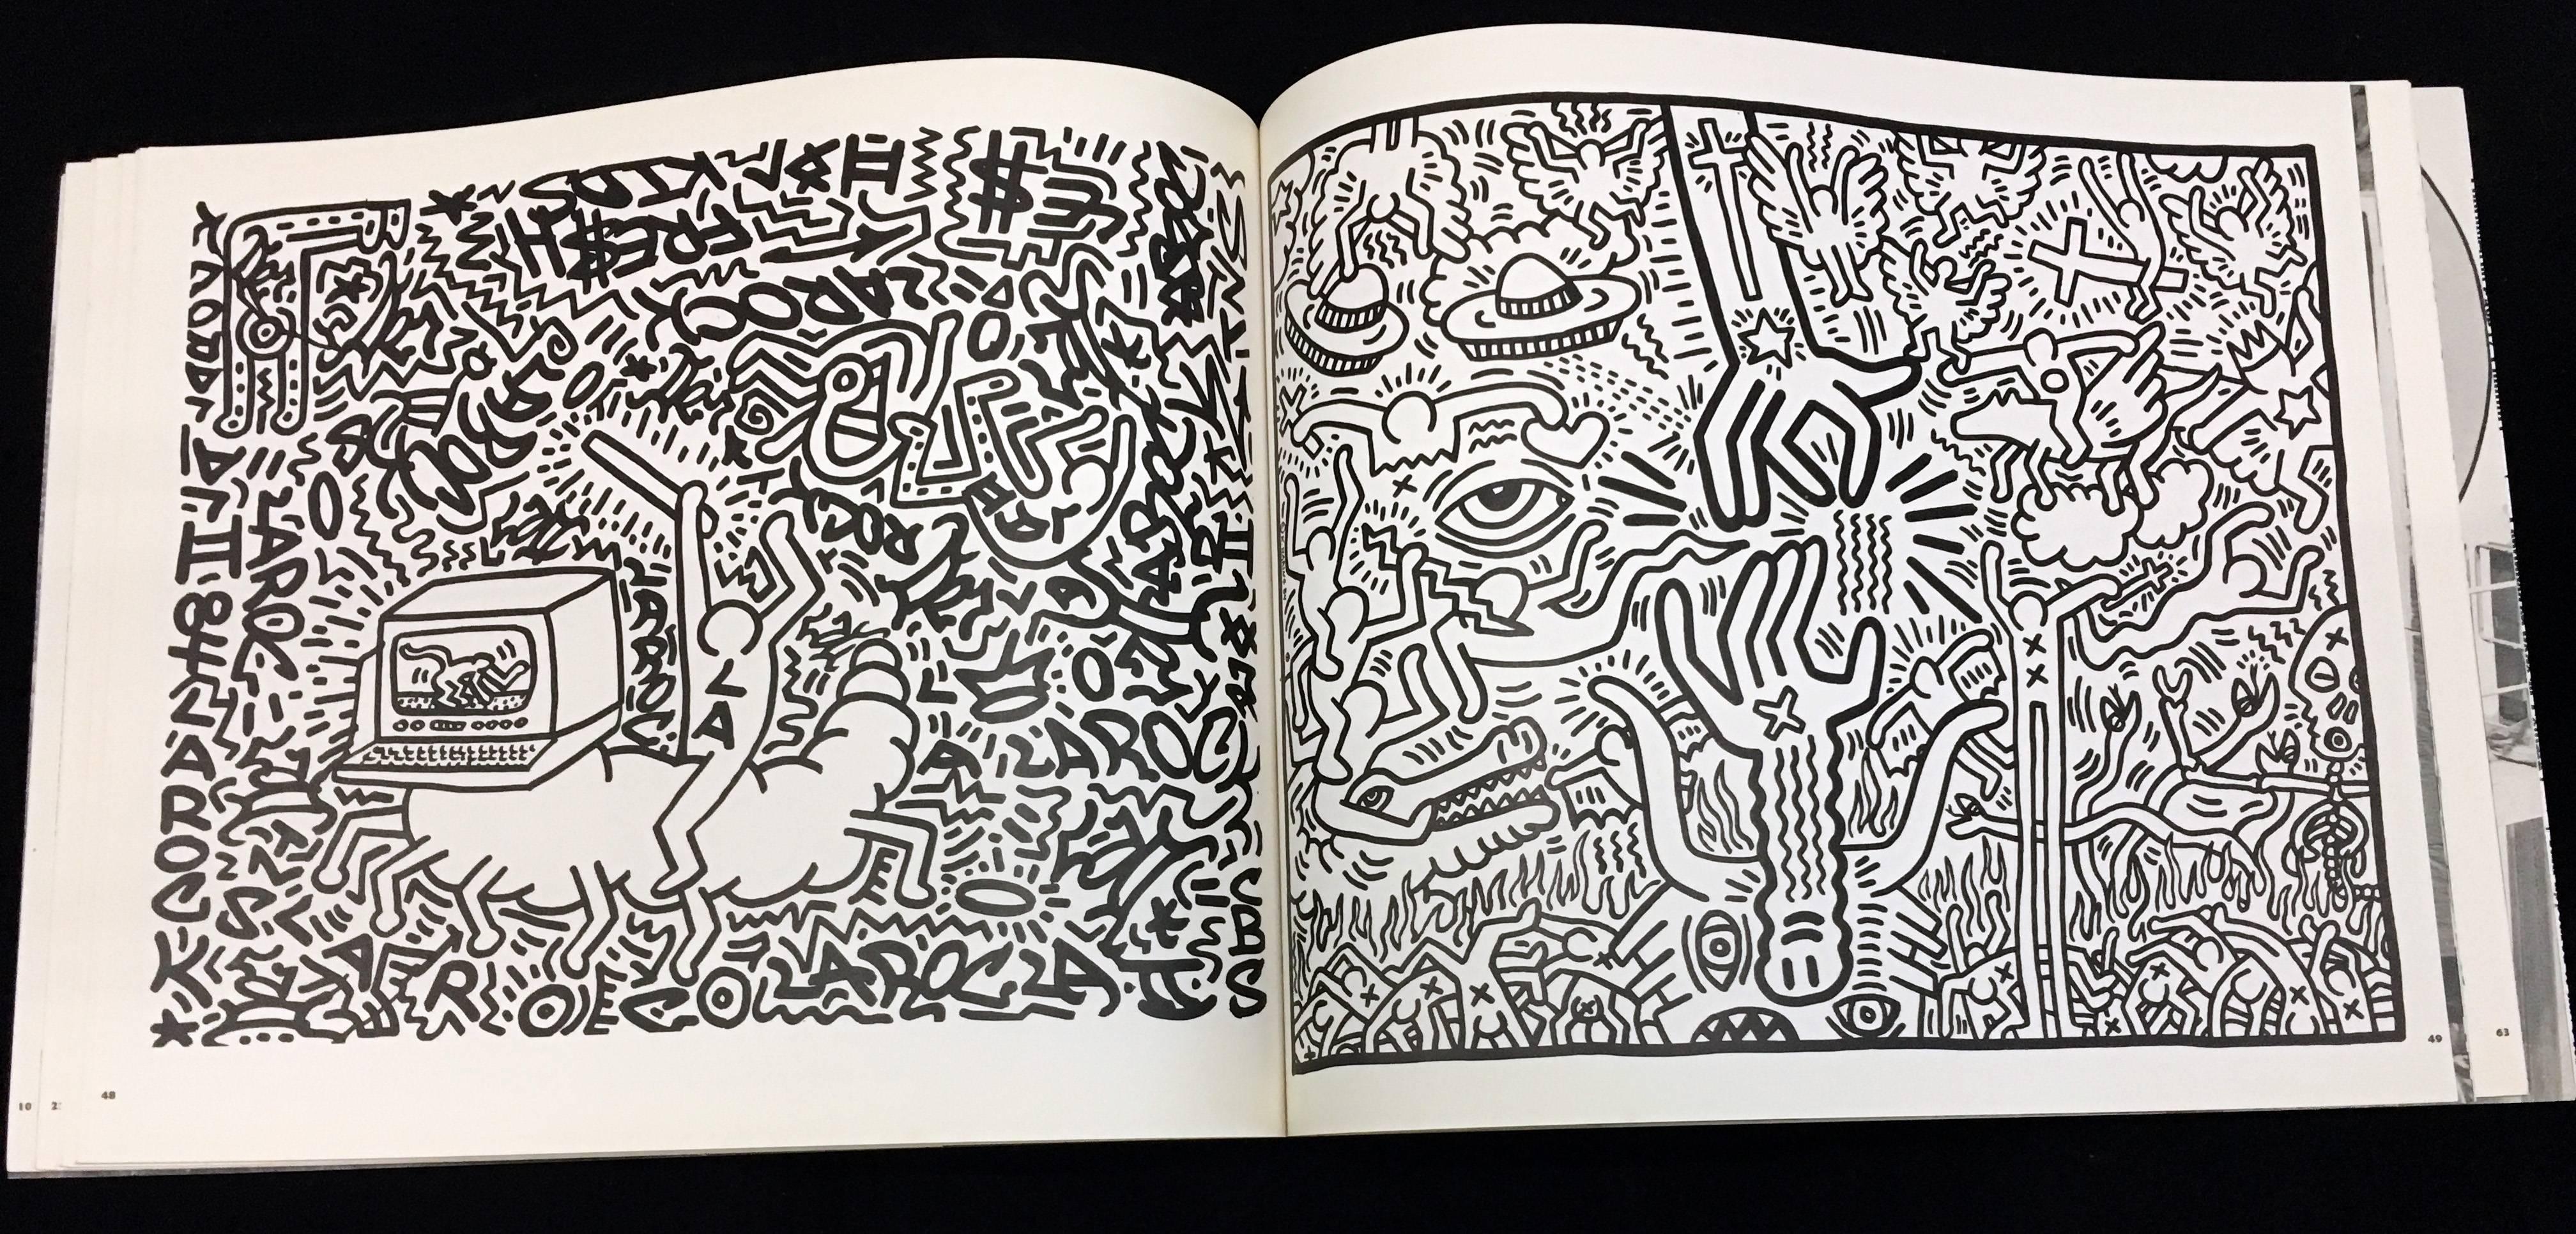 Keith Haring Stedelijk Museum 1986 (Keith Haring 1986 exhibition catalog) For Sale 6